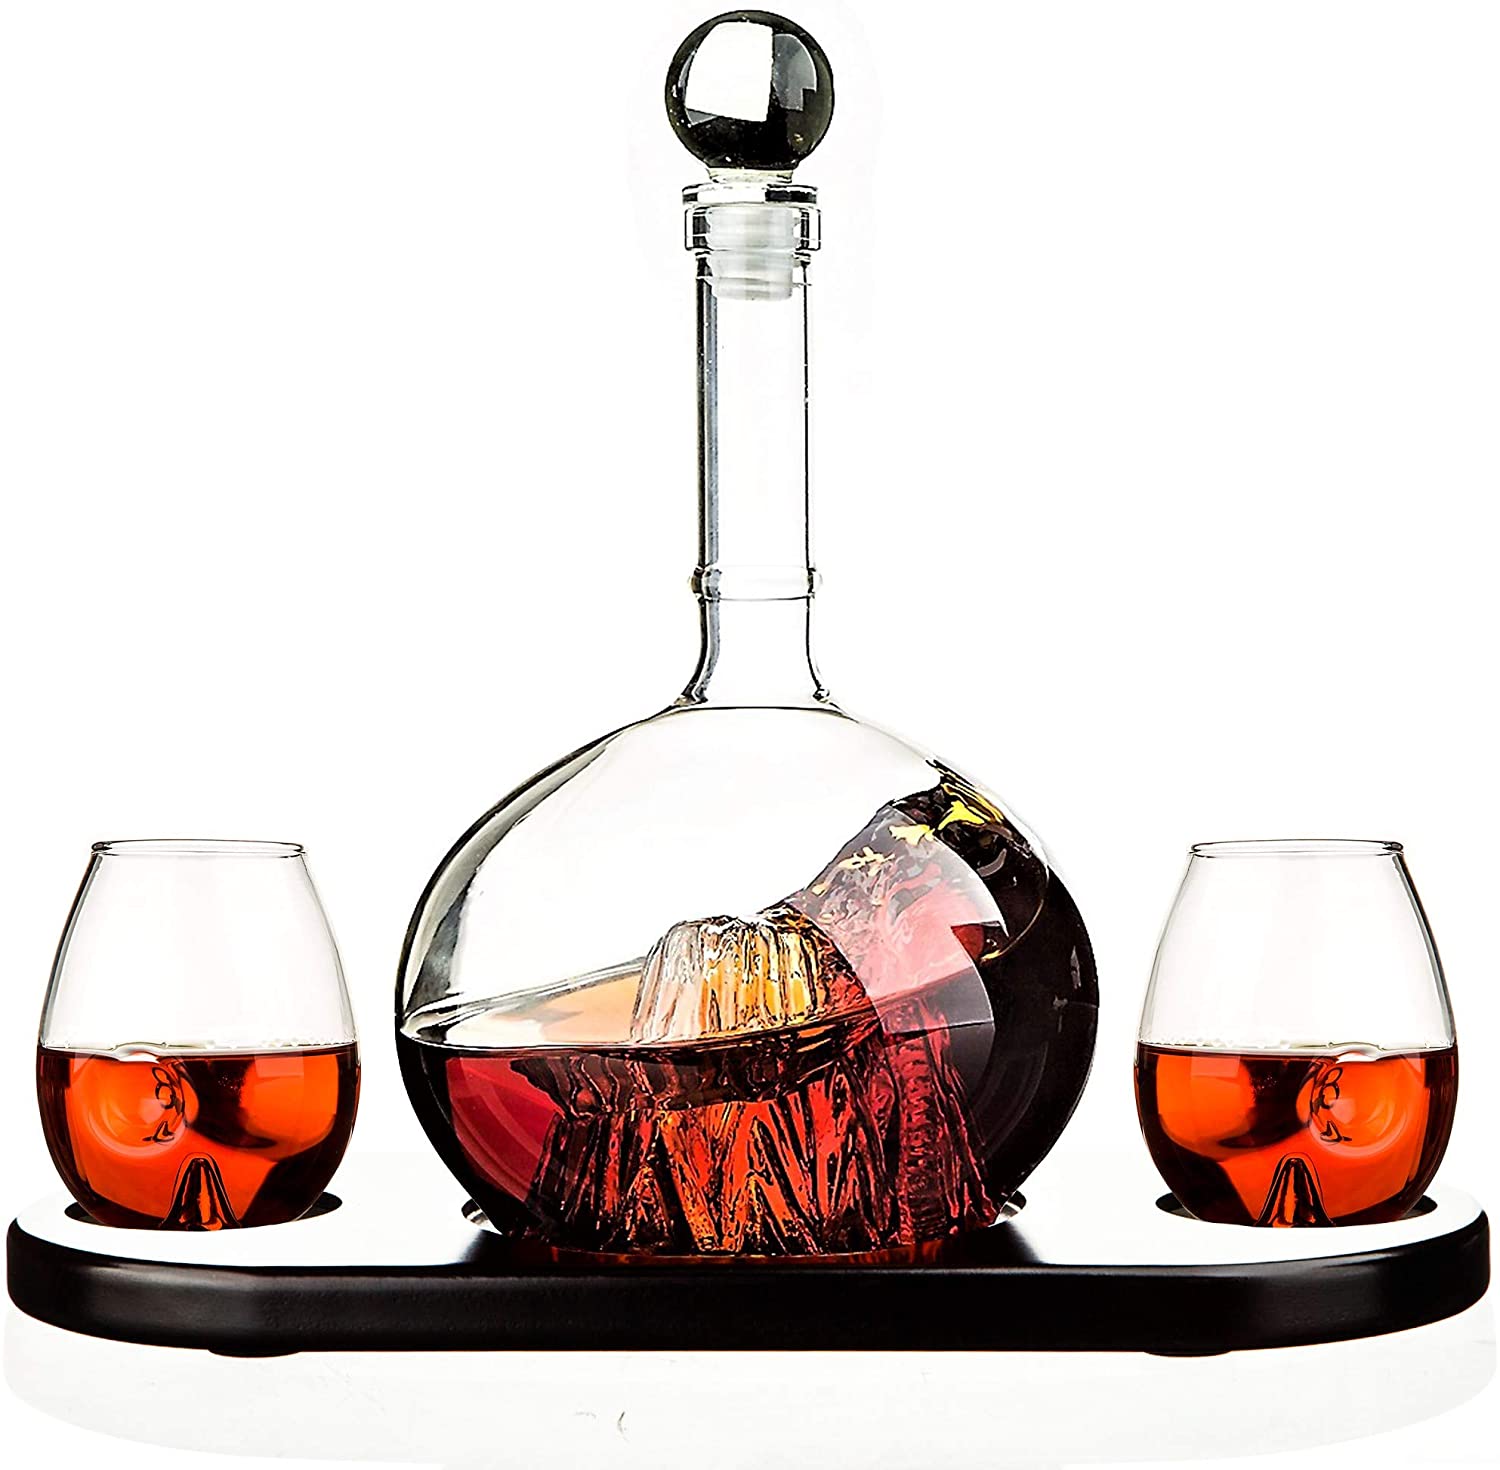 whiskey glasses and decanter